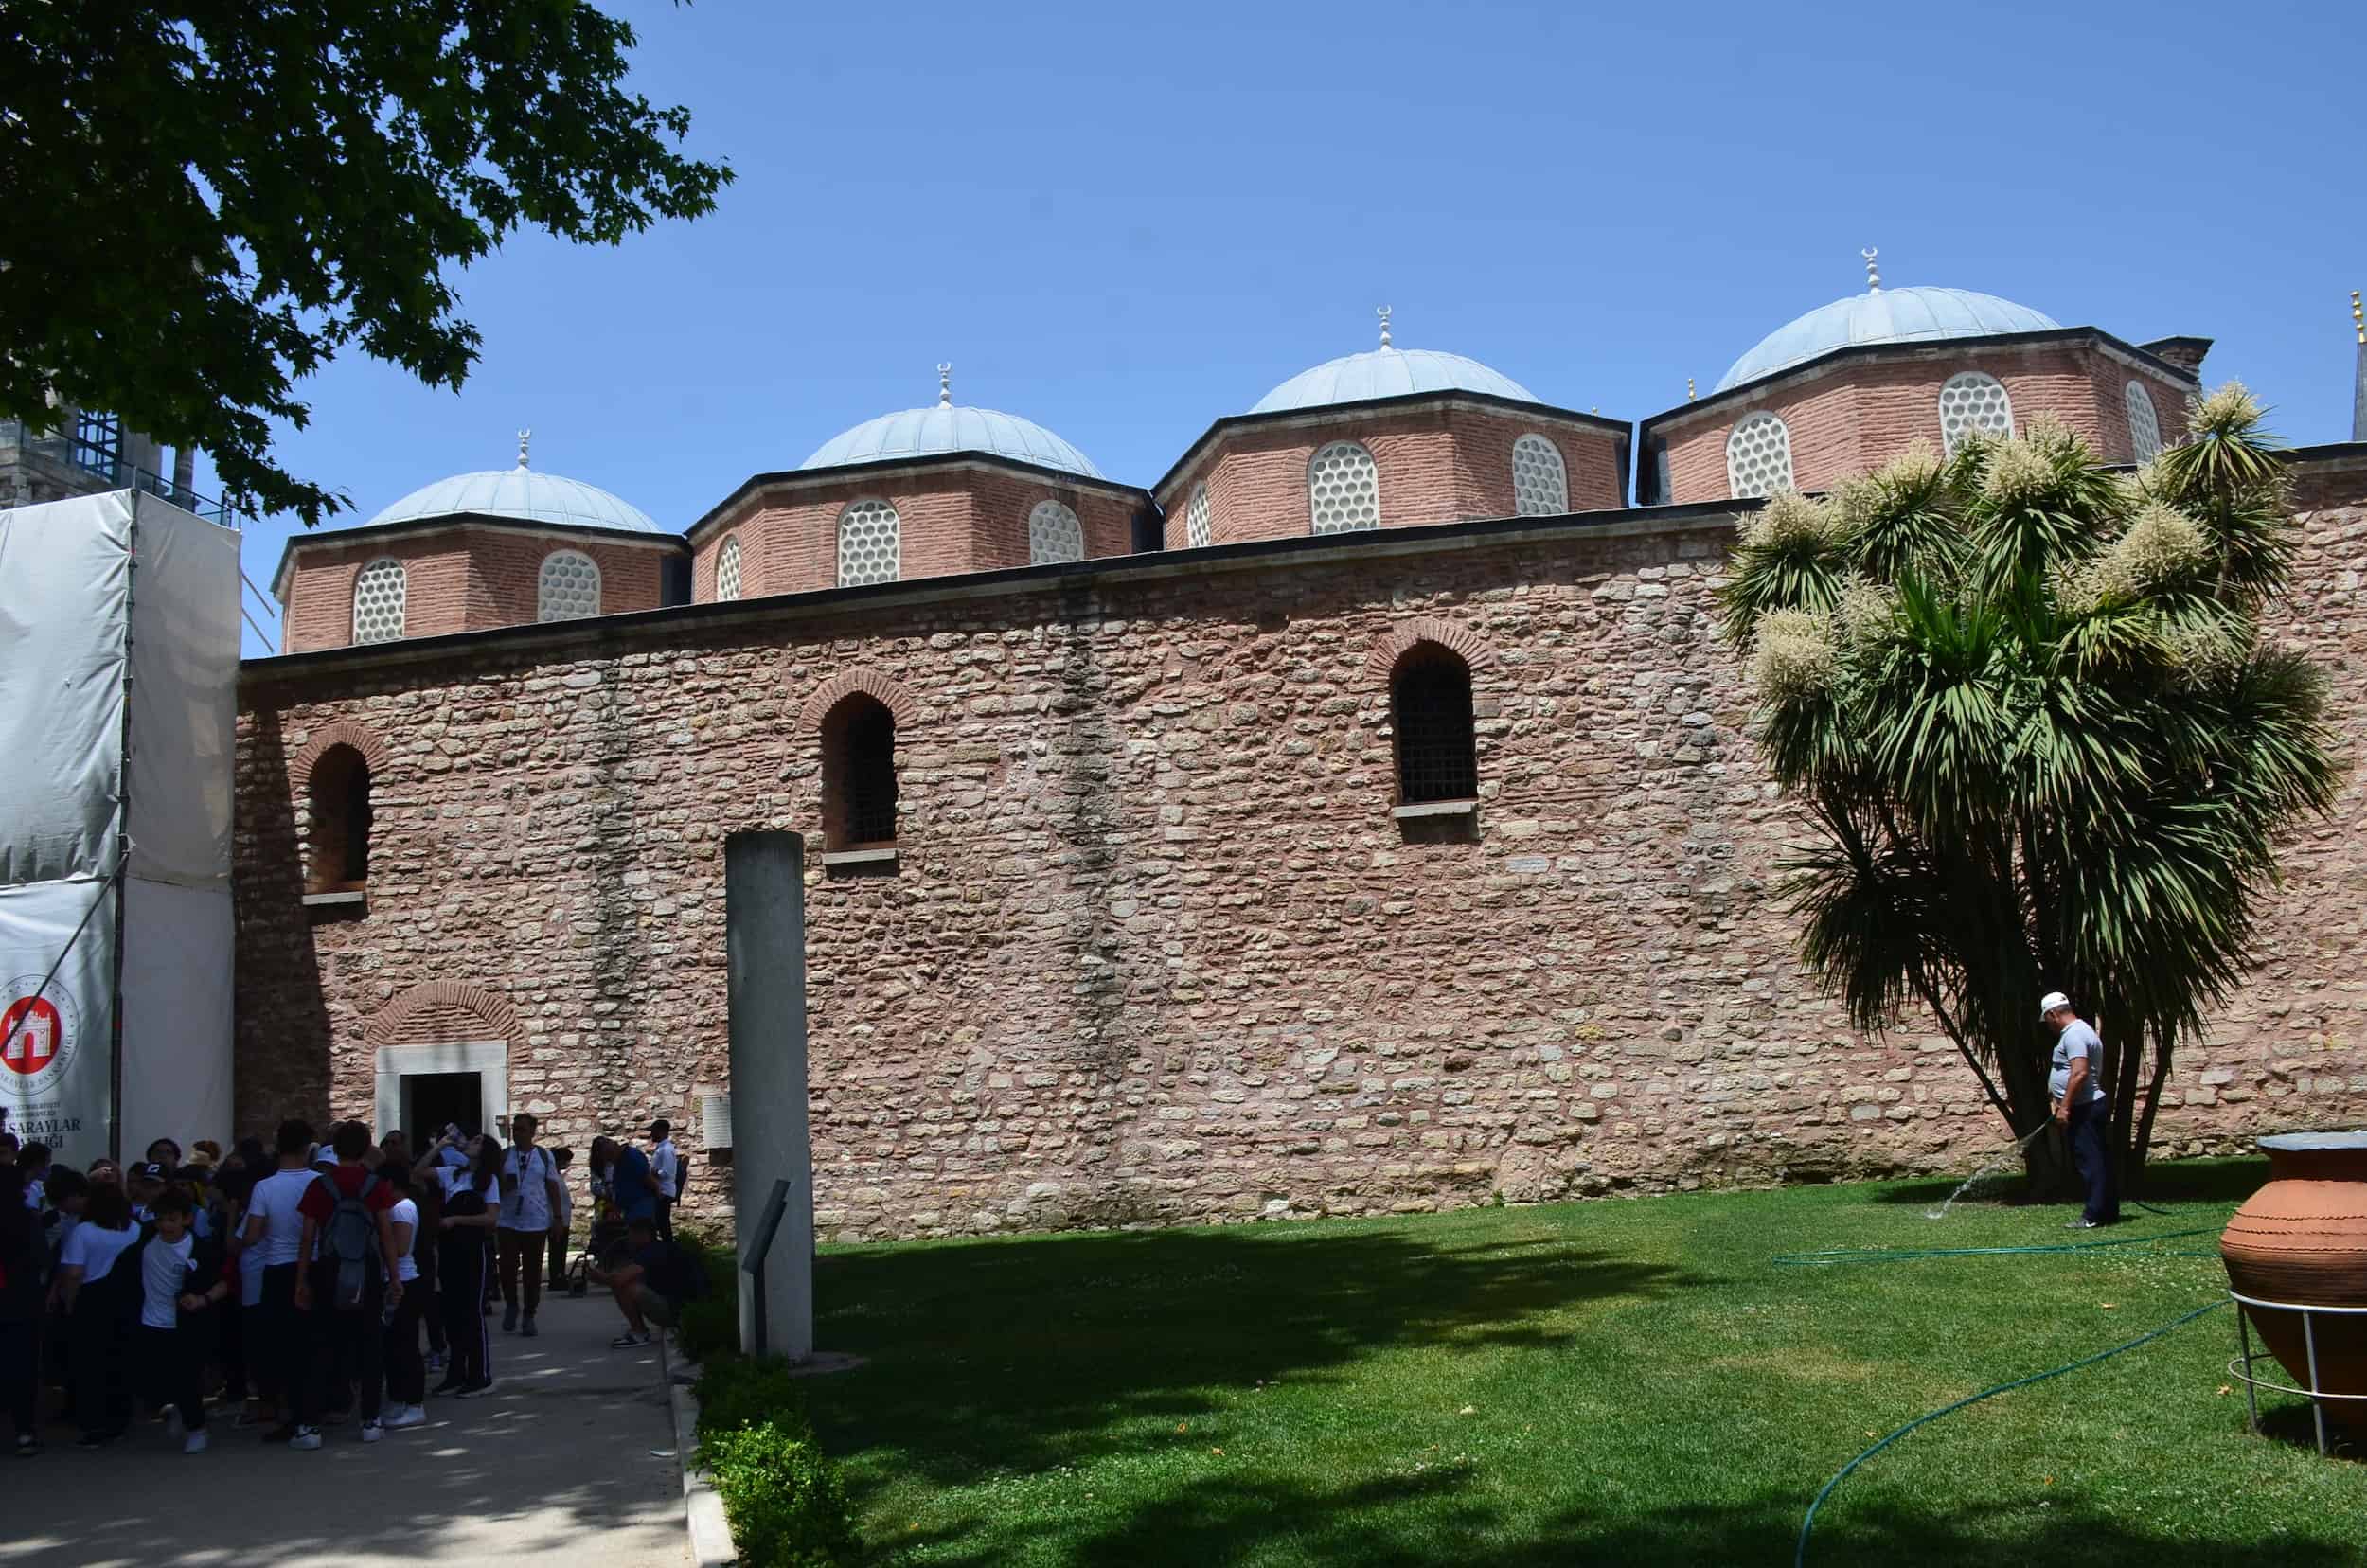 Outer Treasury at Topkapi Palace in Istanbul, Turkey